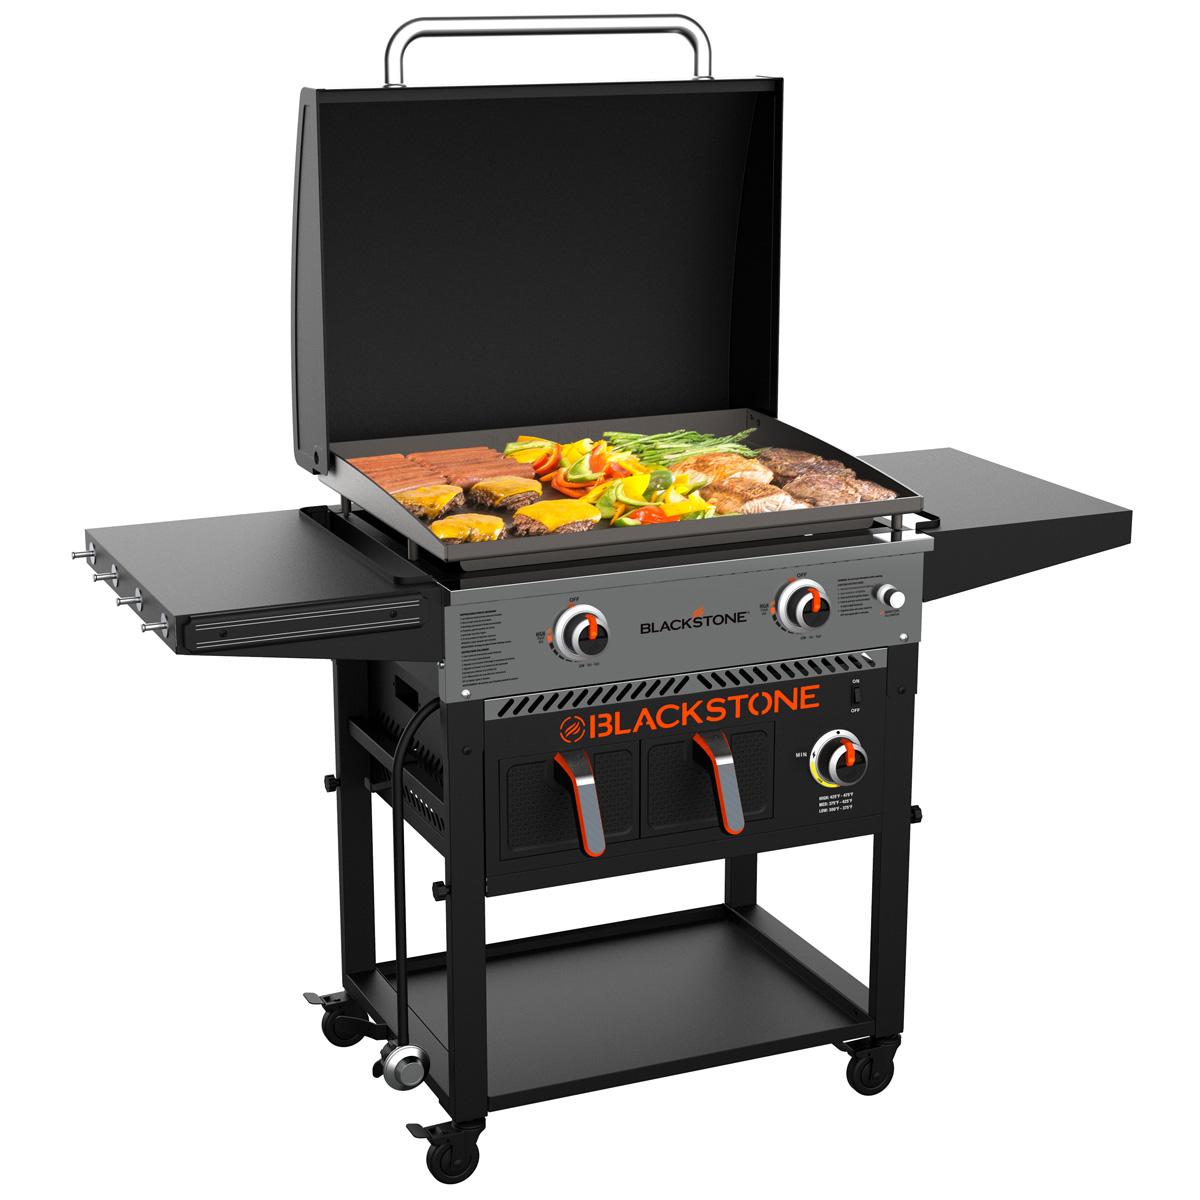 Blackstone 2-Burner 28in Griddle with Electric Air Fryer for $347 Shipped